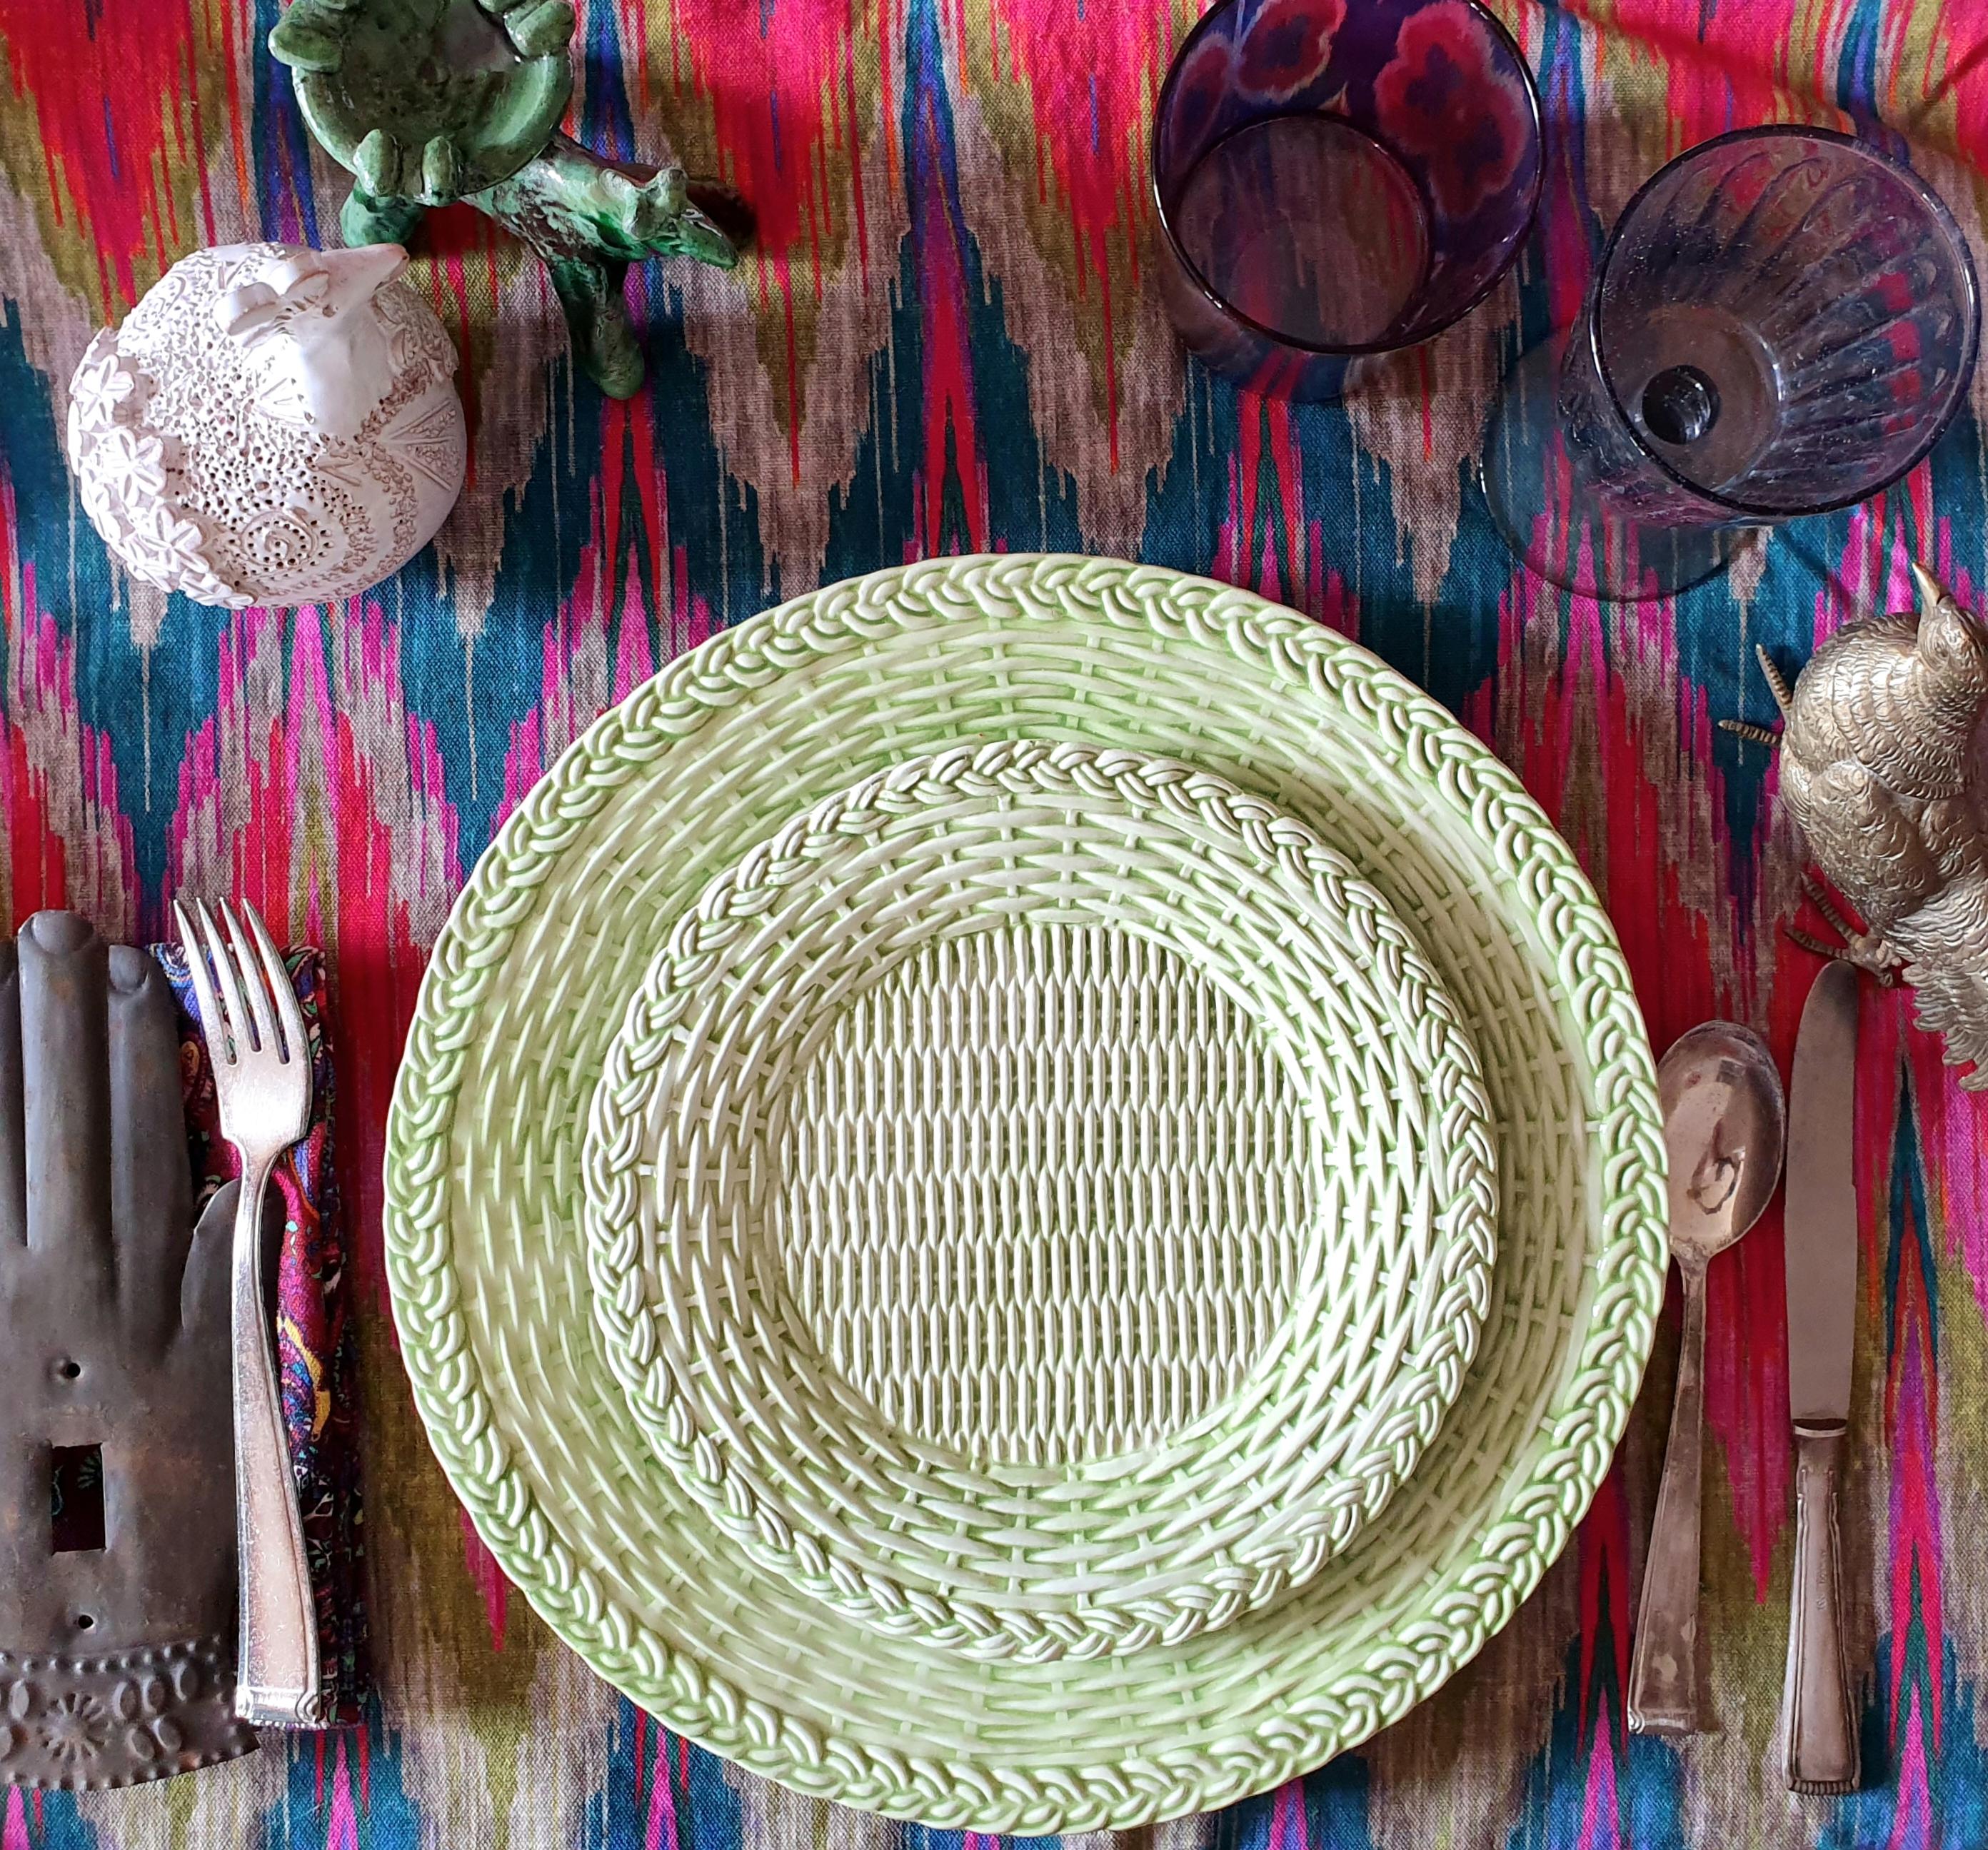 Green as the gardens that give the name to this collection
This handmade and hand painted plate reproduces the rattan plates used for picnic and outdoor lunches
Made in Italy.